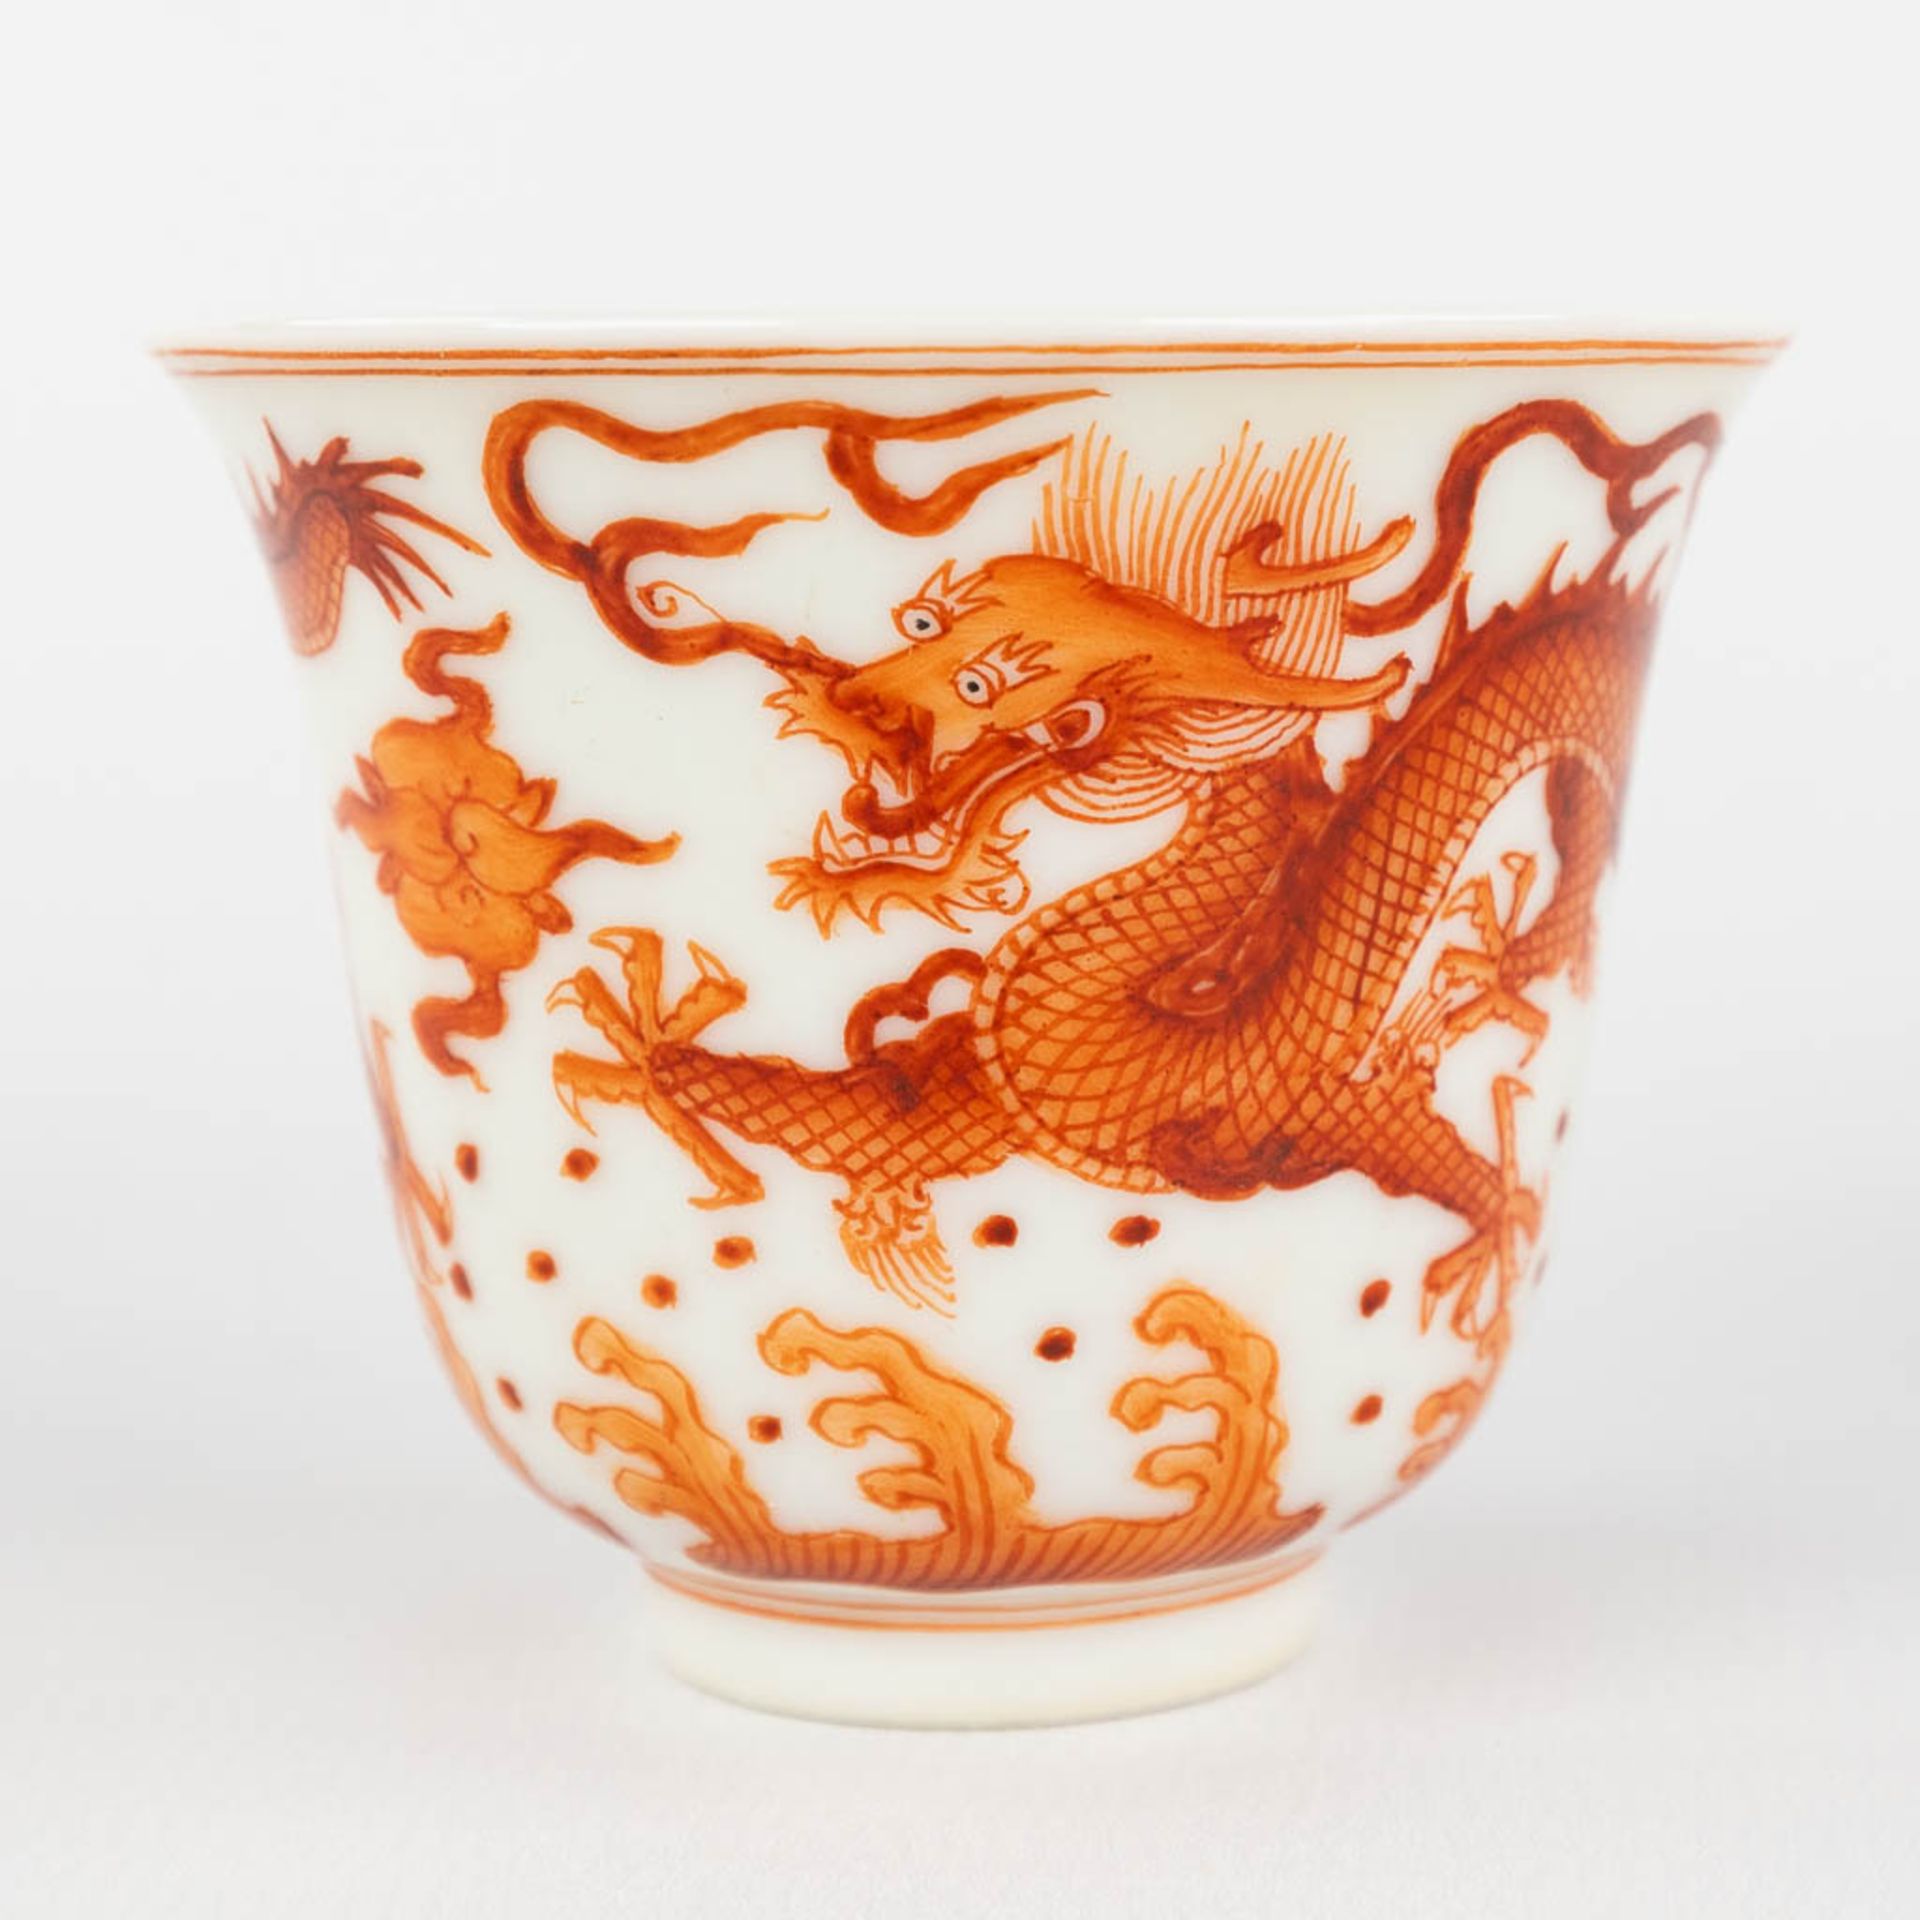 A pair of Chinese teacups, red dragon decor, Guangxu mark and period. (D:6 x H:5 cm) - Image 8 of 9